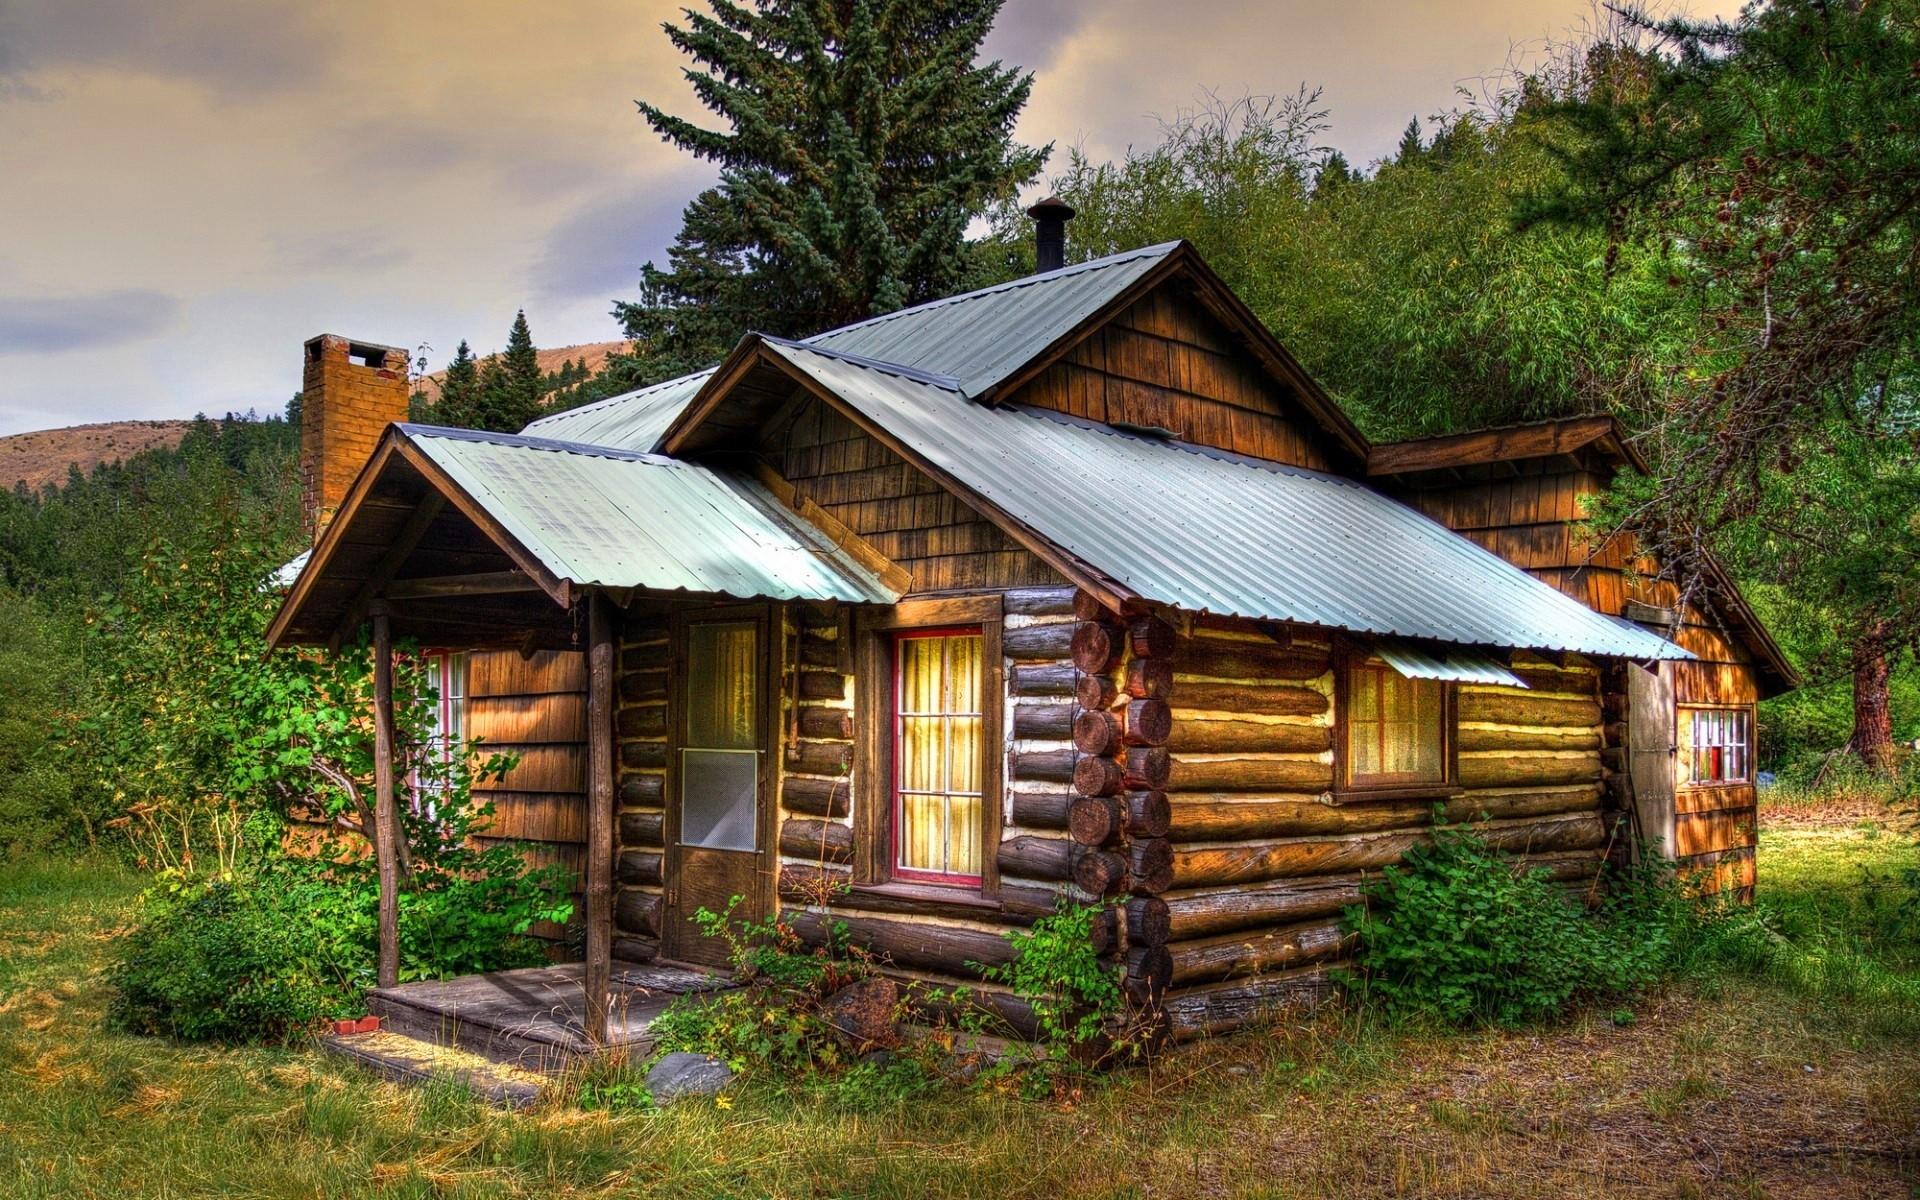 Old wooden cabin wallpaper. PC